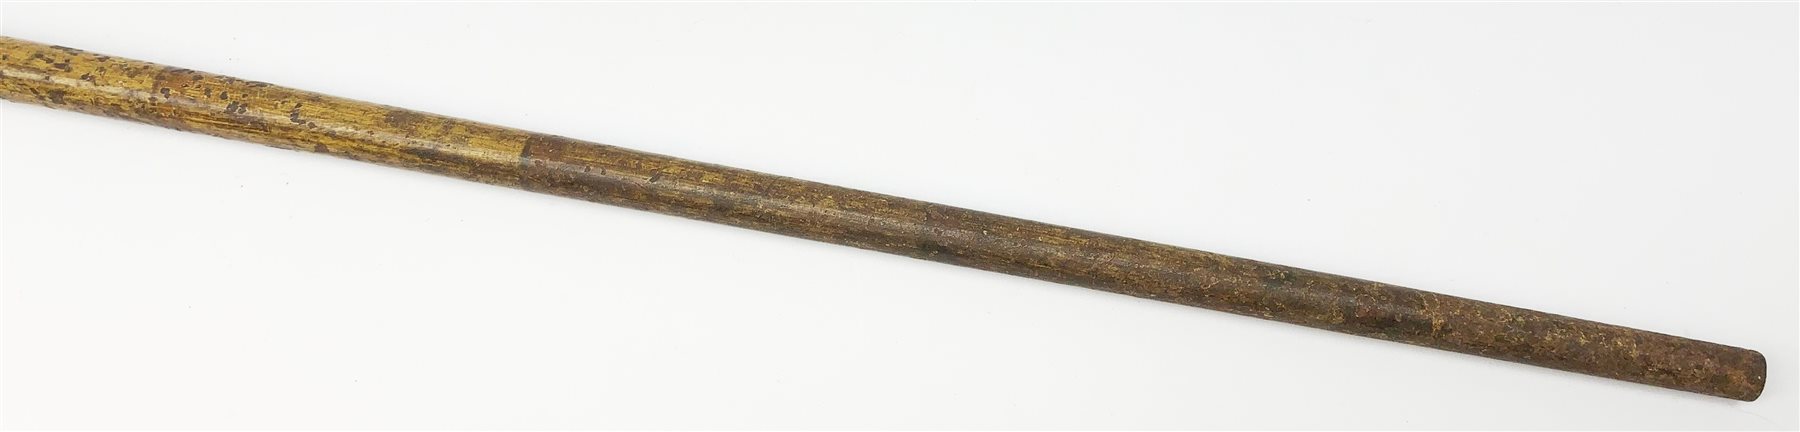 Mid-19th century all steel muzzle loading percussion cap walking stick shotgun, approximate calibre - Image 4 of 5